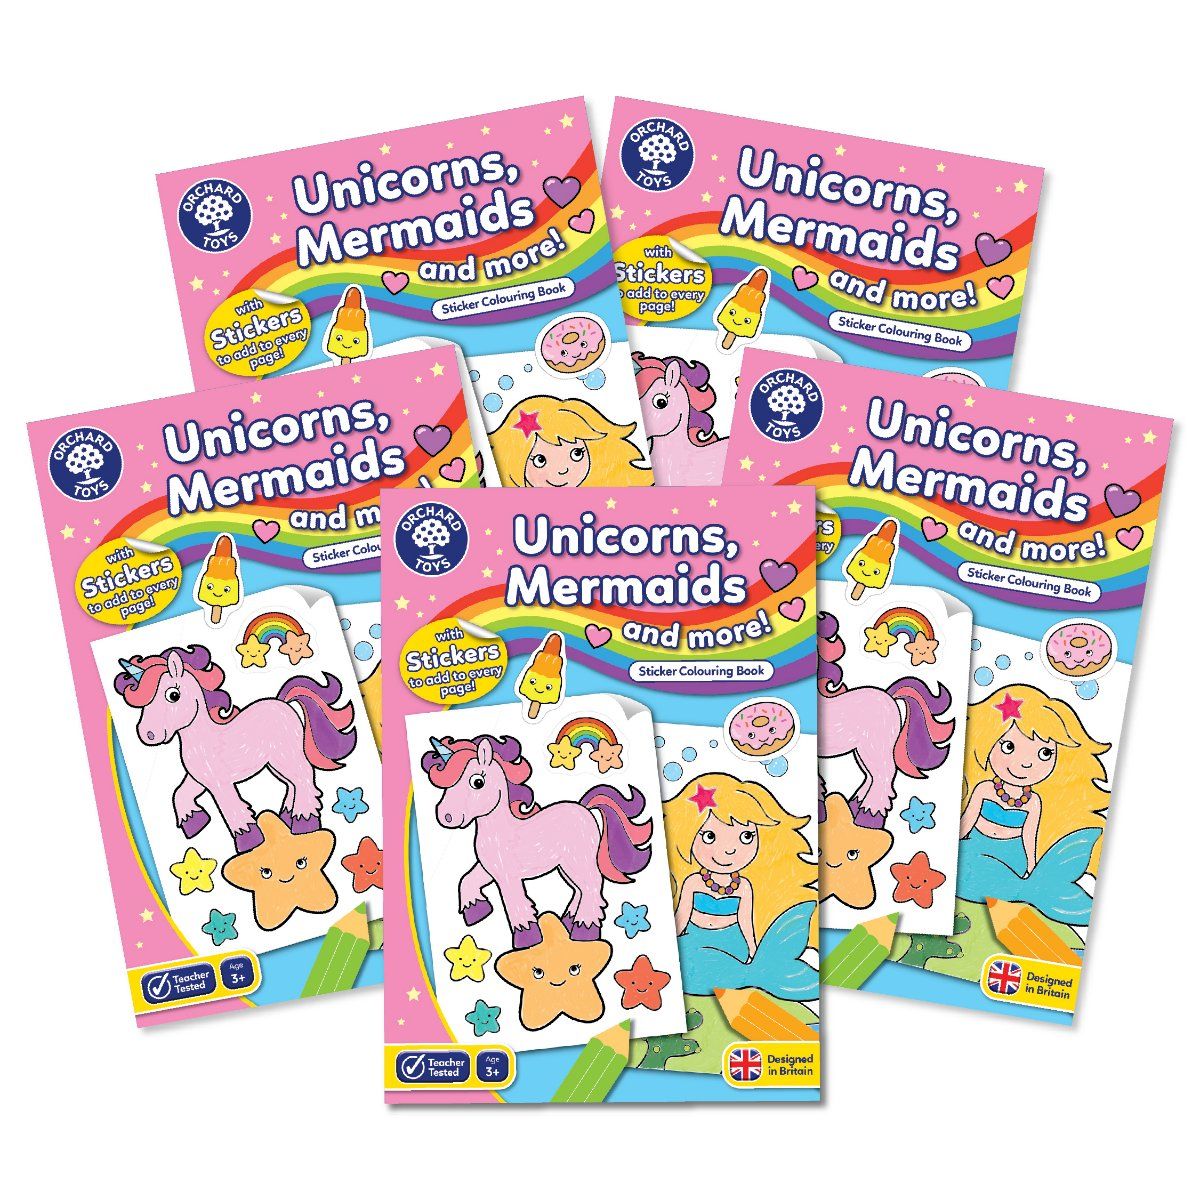 Orchard Toys Unicorns, Mermaids and More Sticker Colouring Books (Pack of 5)